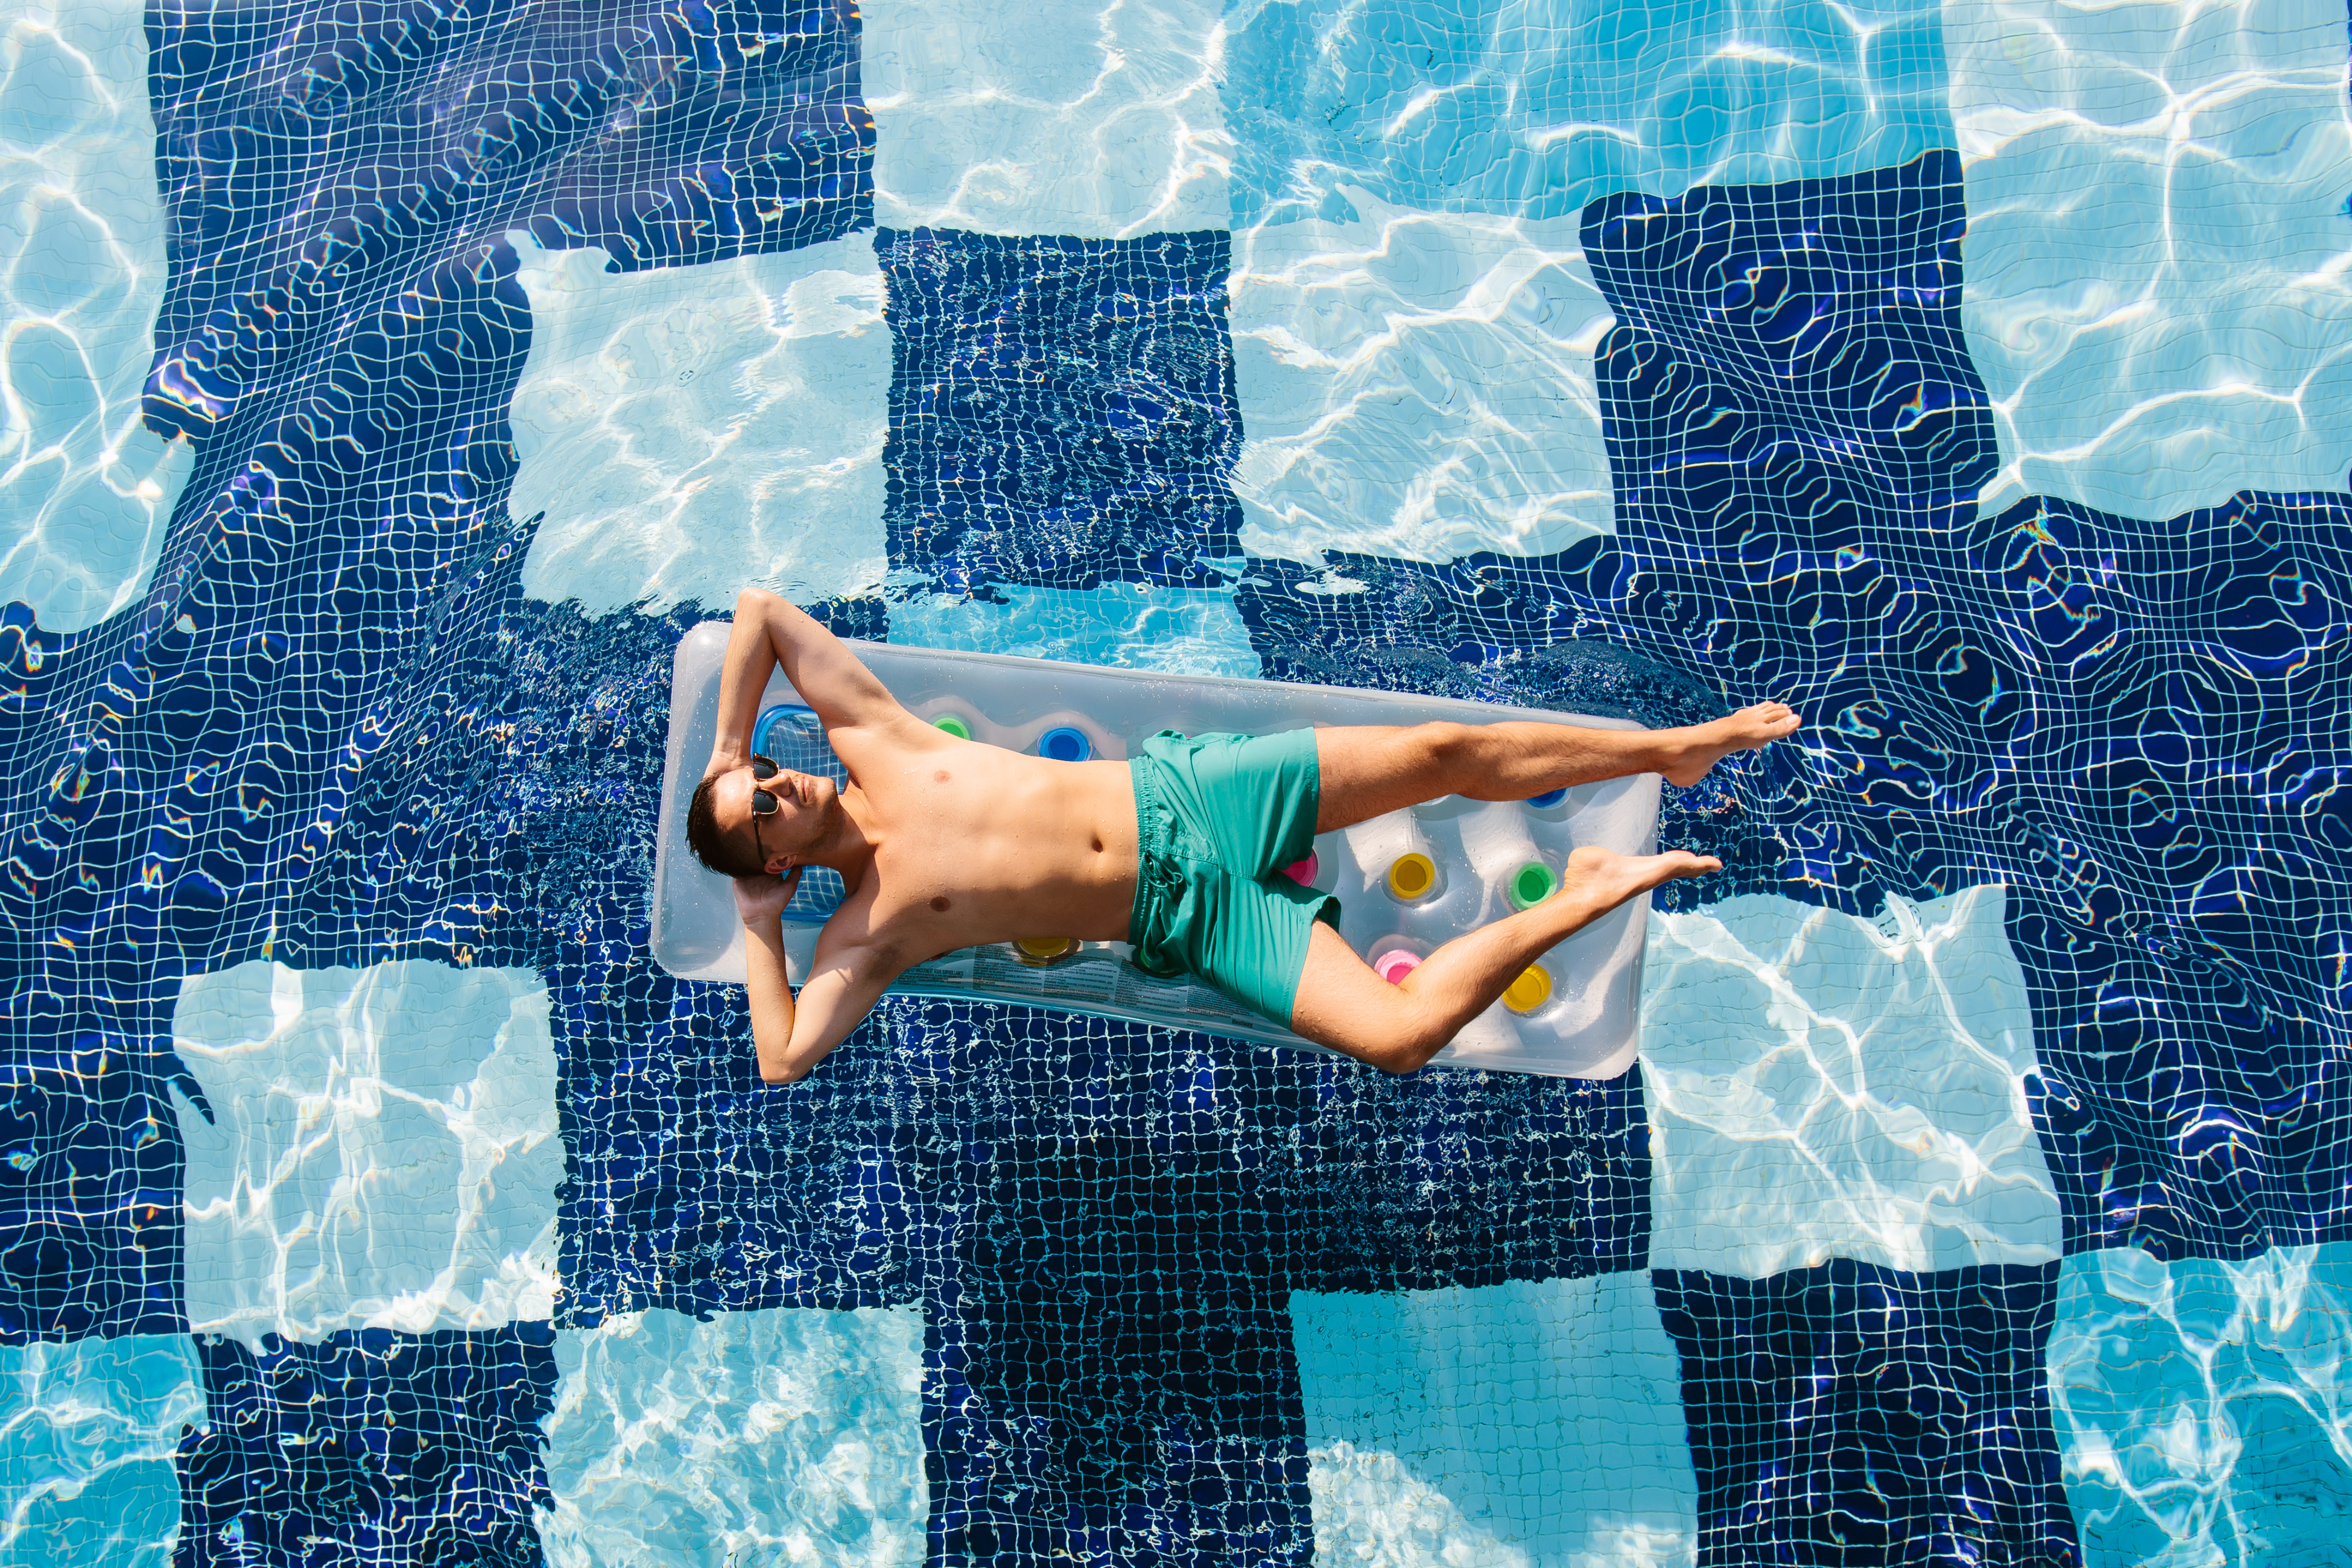 A man floating in the pool